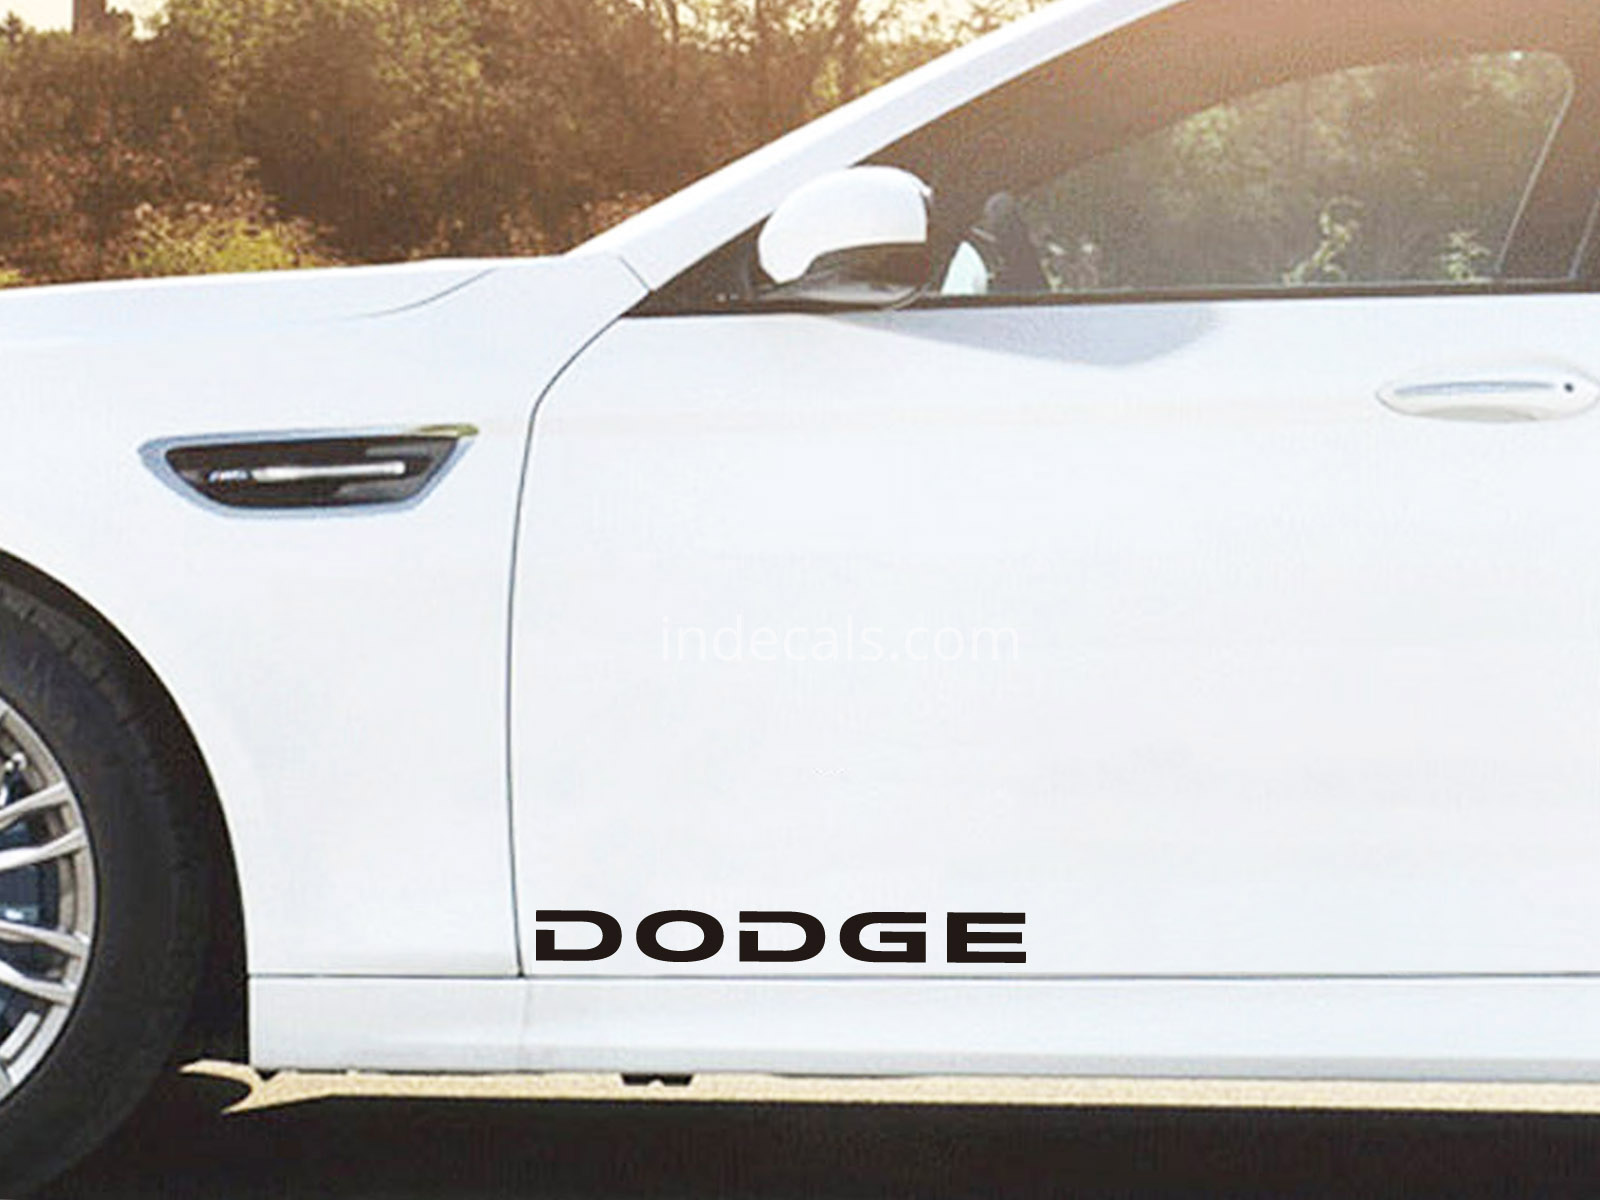 2 x Dodge Stickers for Doors Large - Black